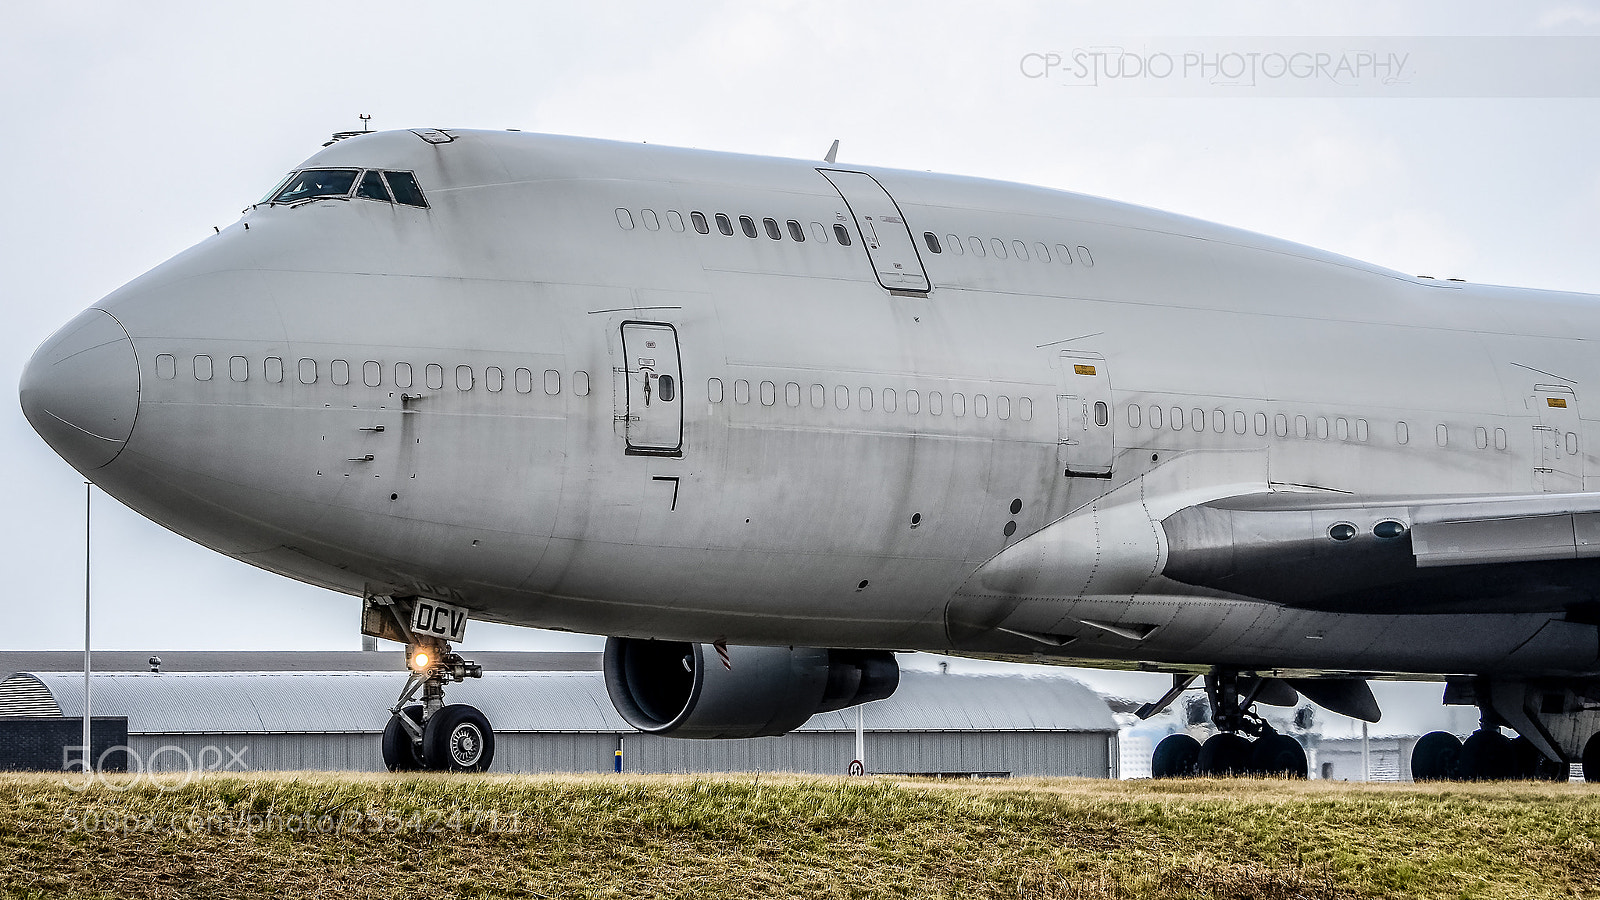 Nikon D7000 sample photo. Boeing 747-4f freighter photography